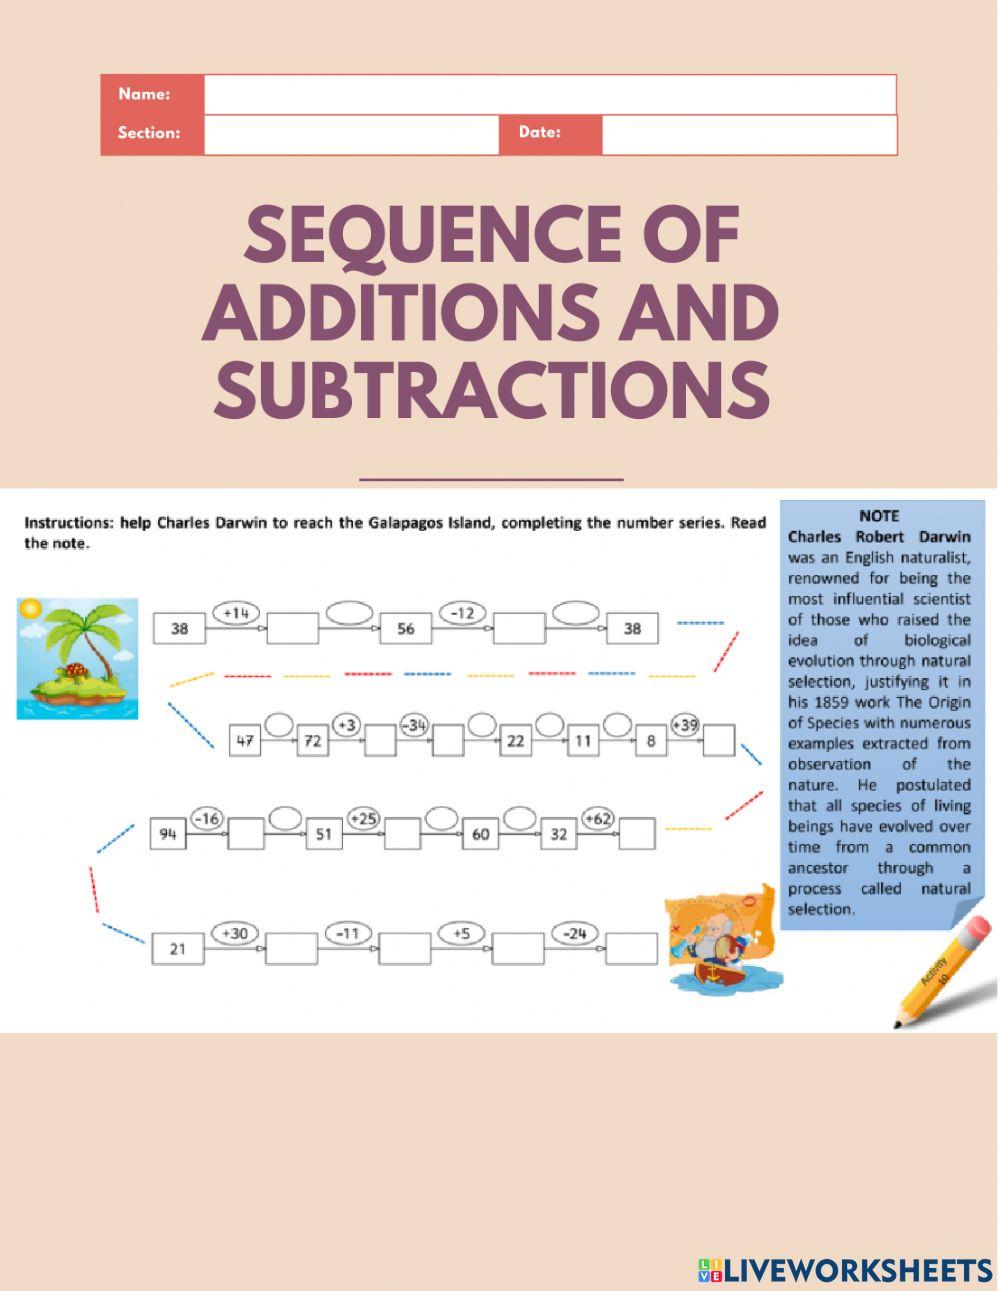 Sequences of additions and subtractions